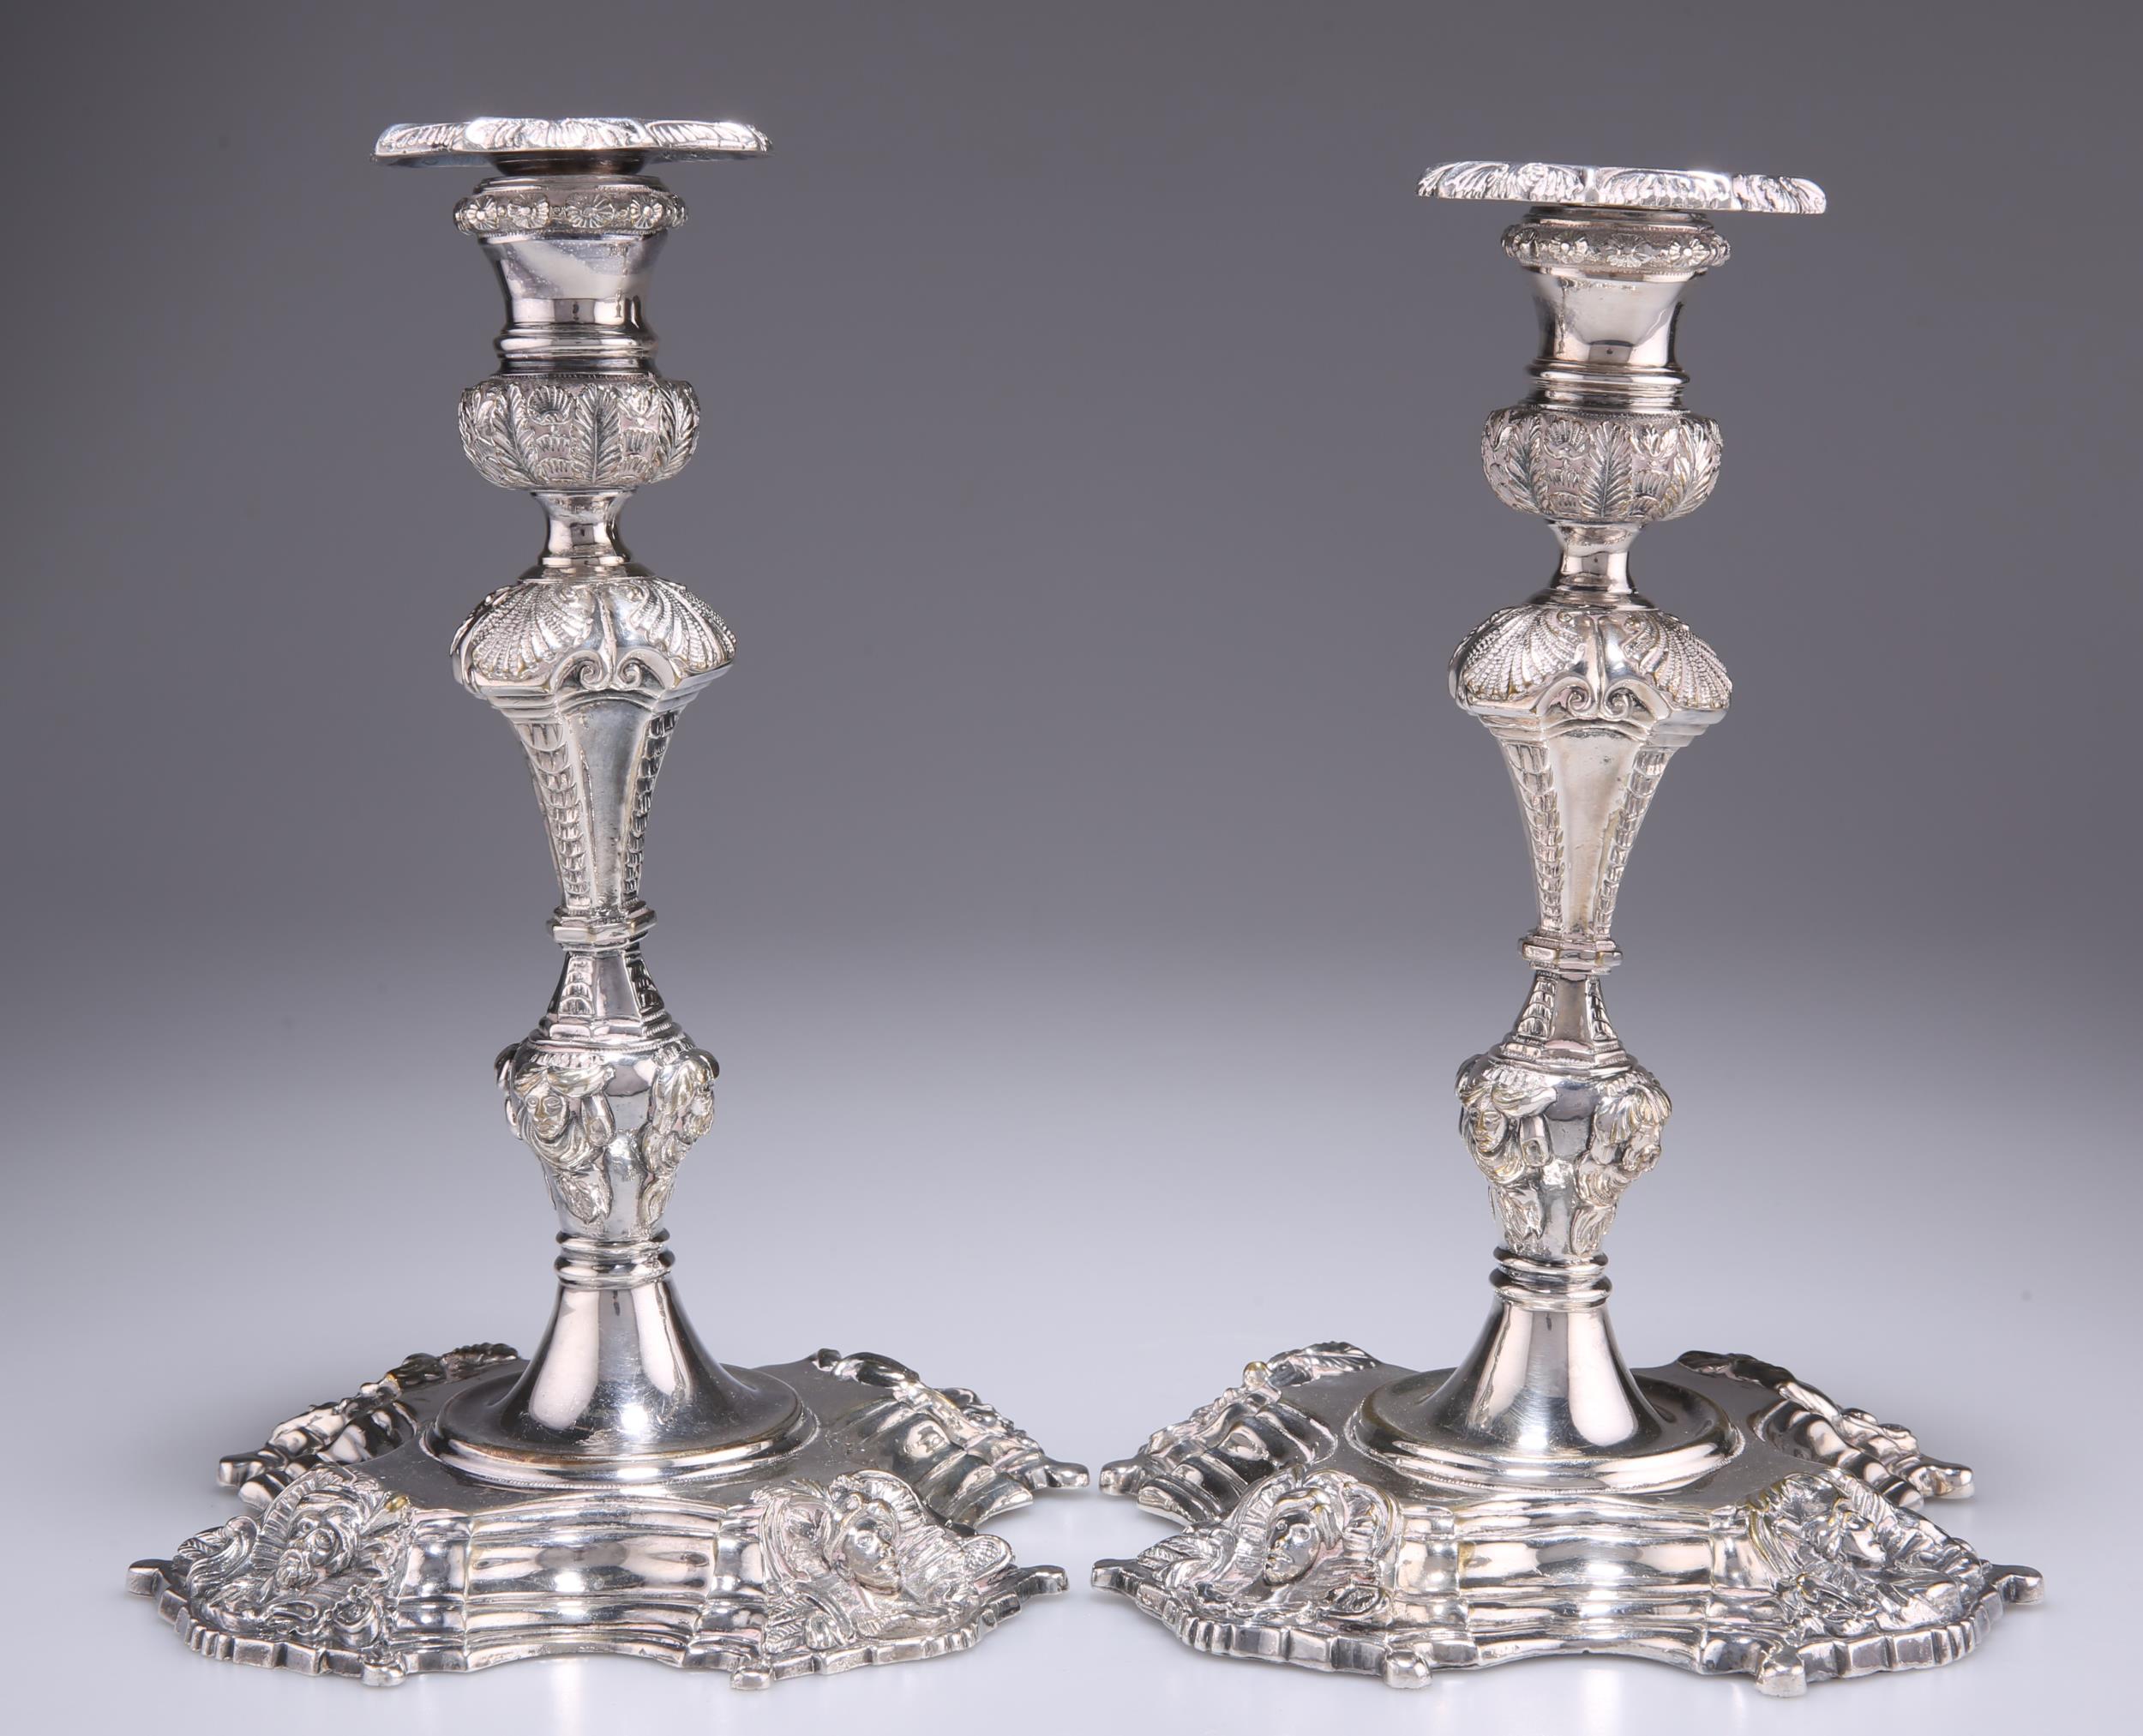 A PAIR OF BAROQUE REVIVAL SILVER-PLATED CANDLESTICKS - Image 2 of 2